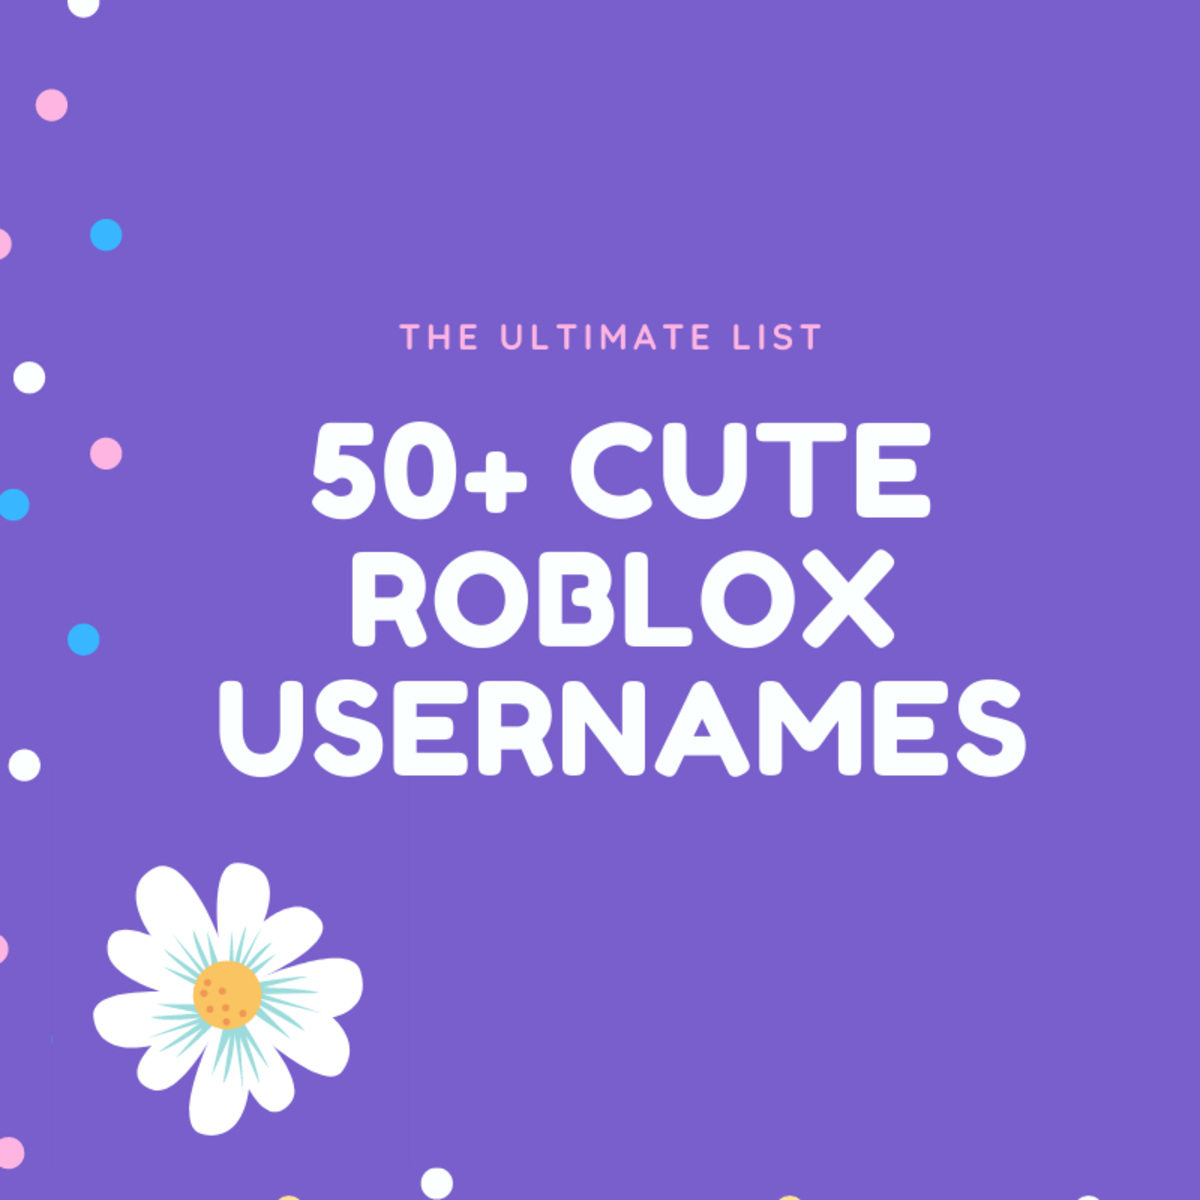 50+ Cute Roblox Usernames and Ideas: The Ultimate List